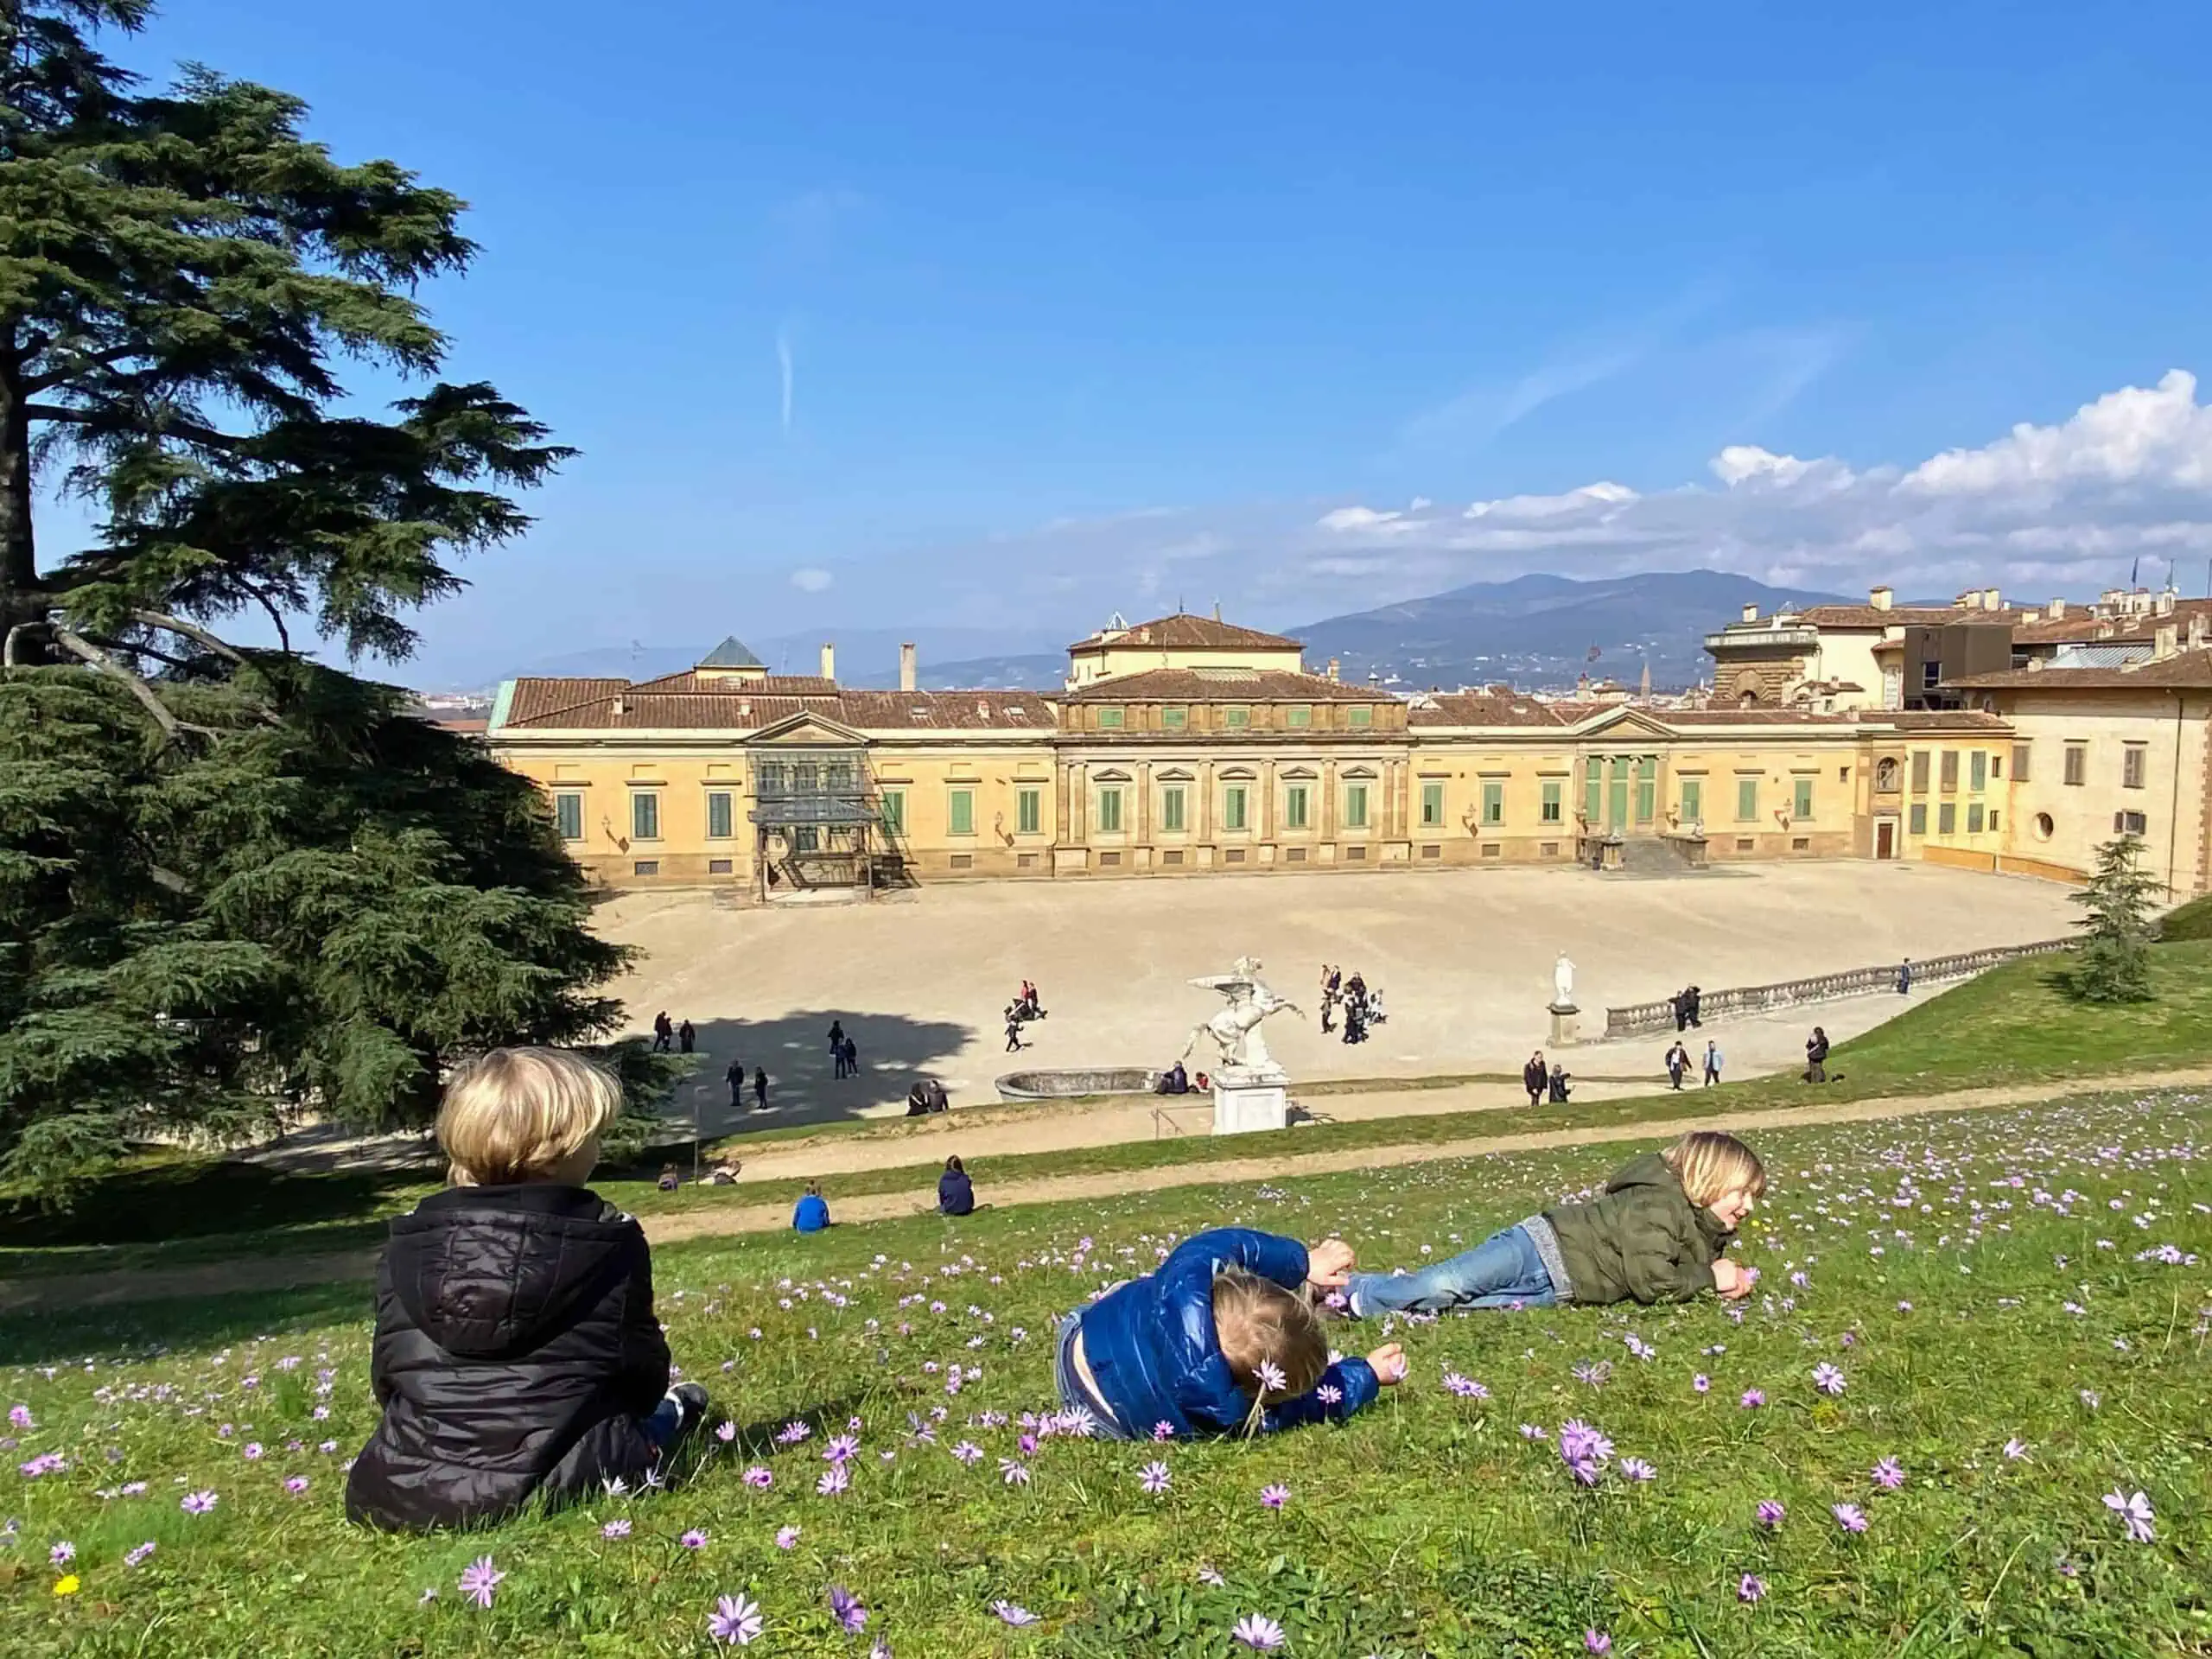 Boys sitting on grass overlooking the back of Palazzo Pitti in Florence, Italy.